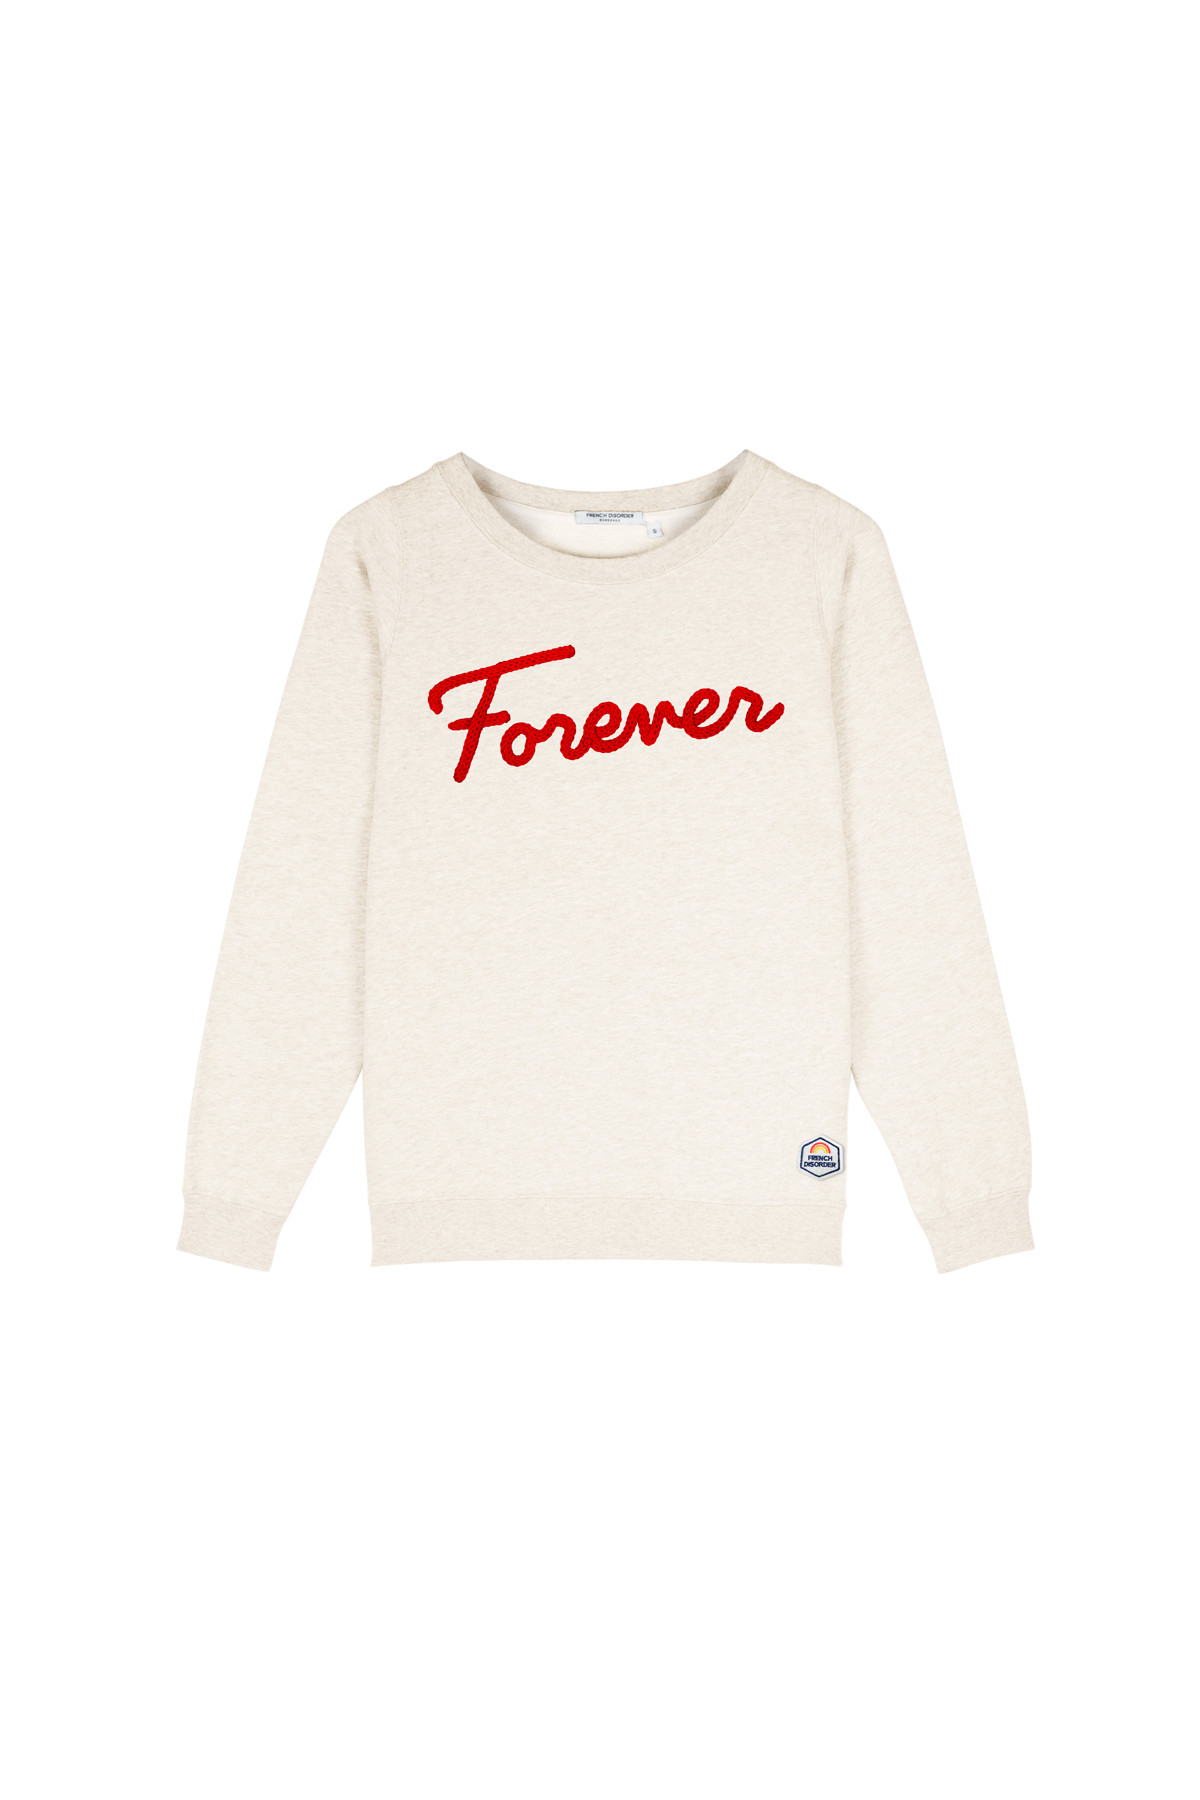 Photo de SWEATS Sweat FOREVER TRICOTIN chez French Disorder